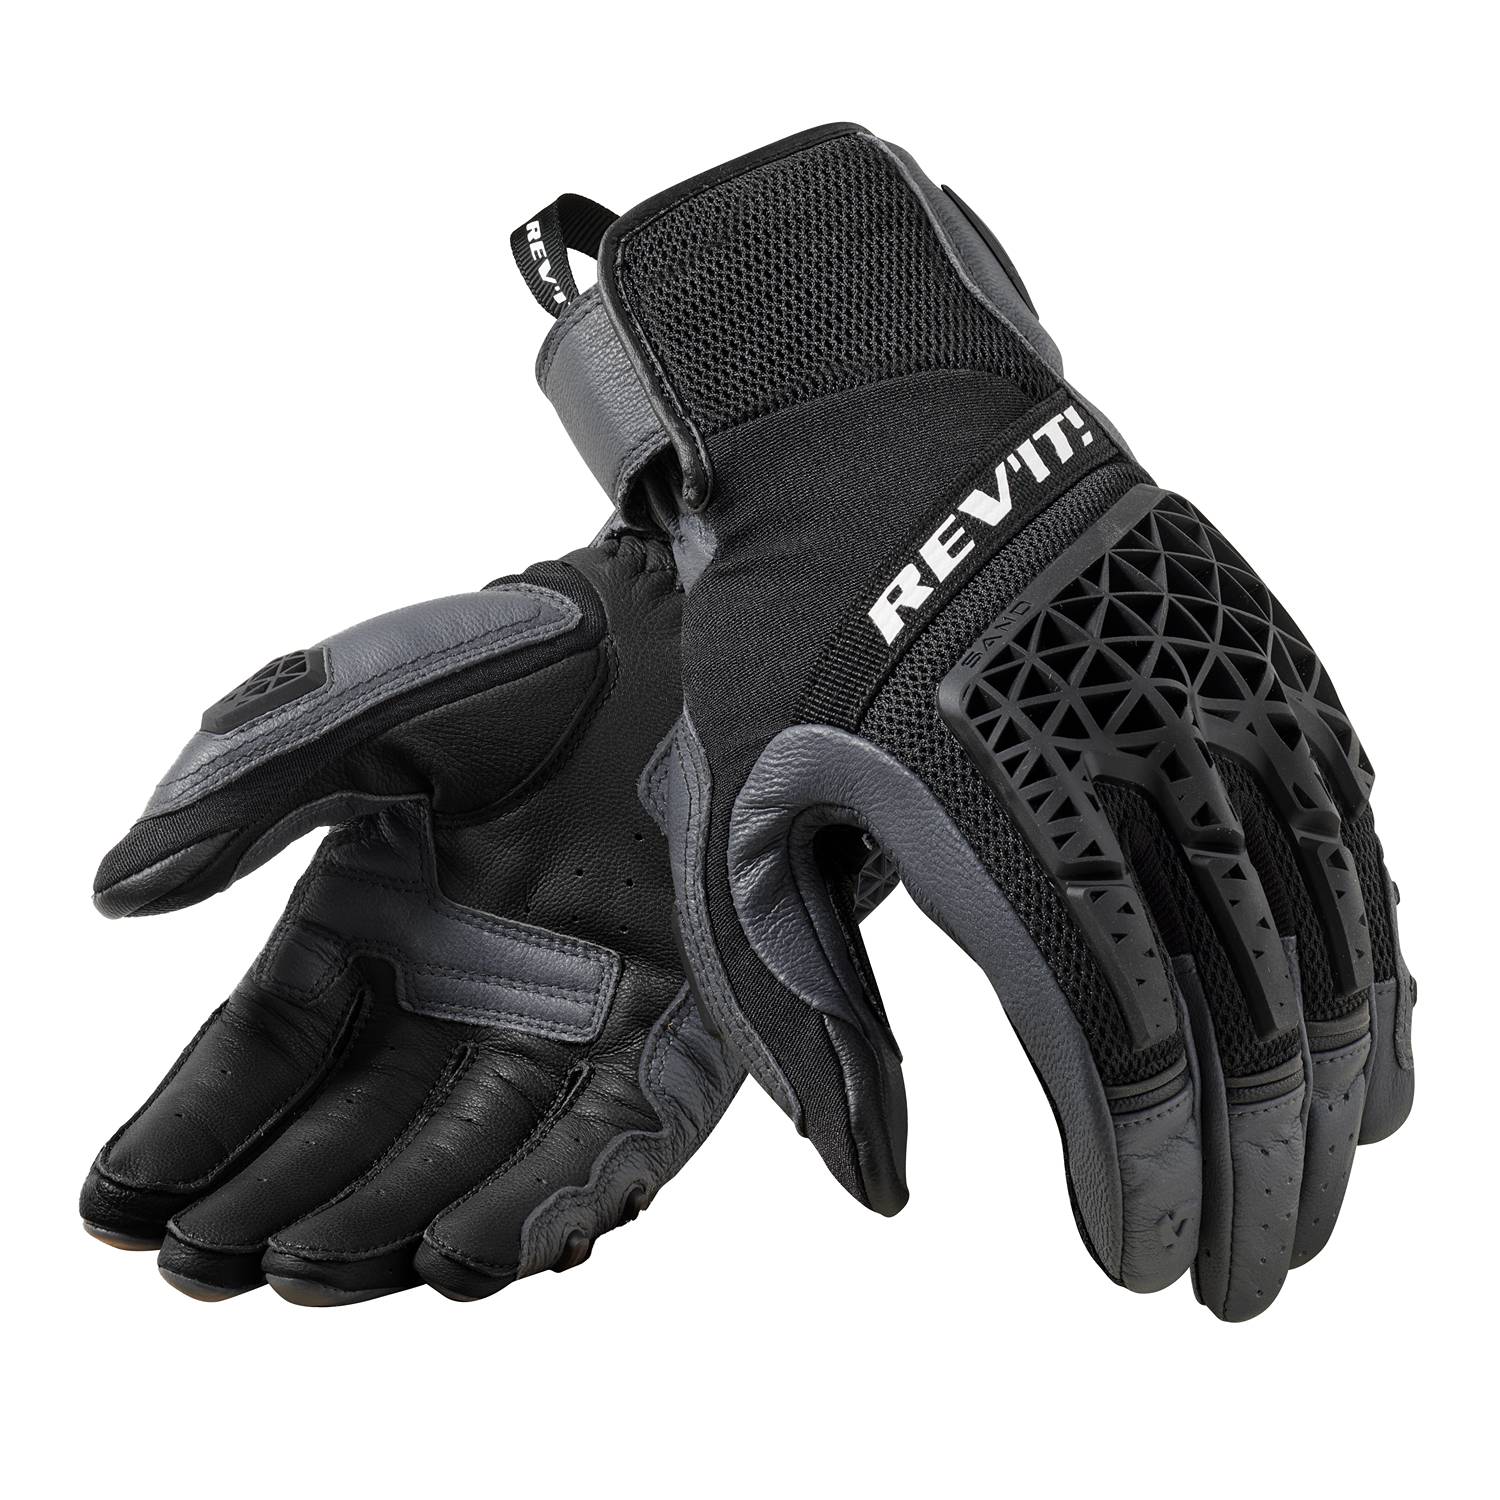 Image of REV'IT! Sand 4 Gloves Gray Black Size M ID 8700001375023